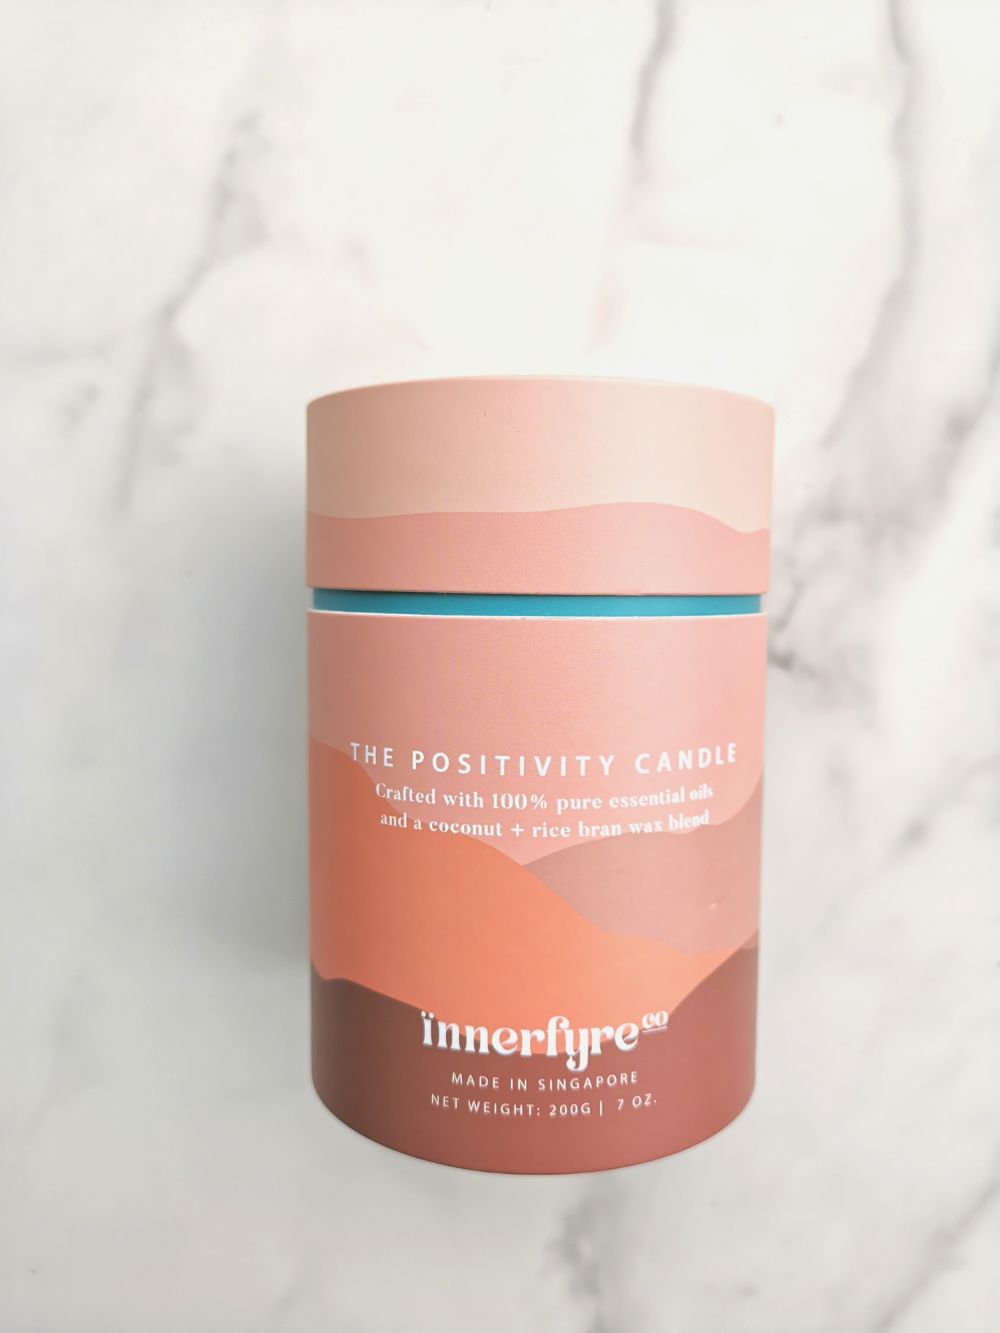 Tube packaging for I AM WISE scented candle